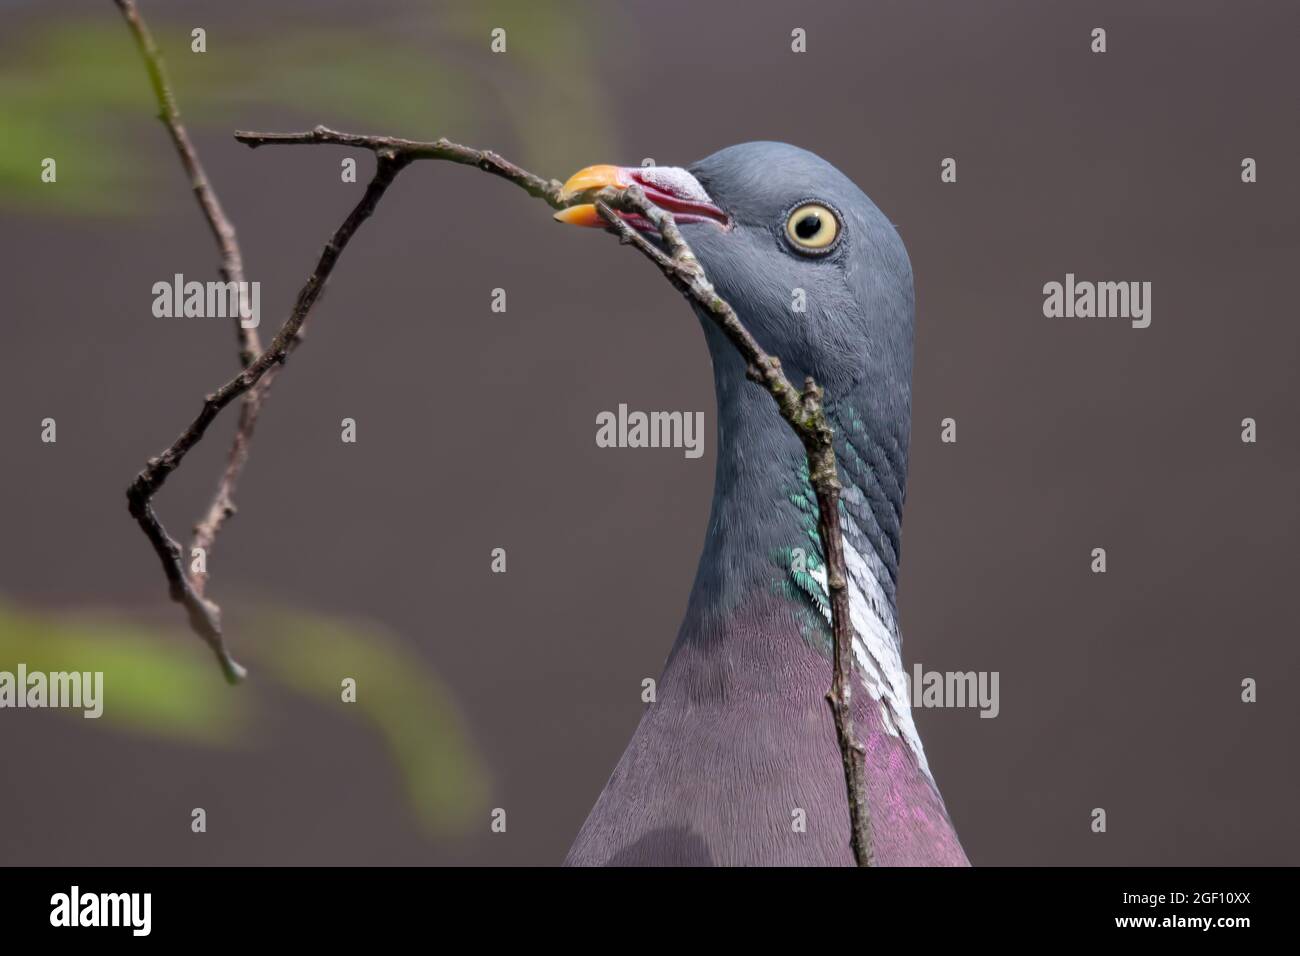 Portrait of a common wood pigeon with nesting material in its beak. Stock Photo